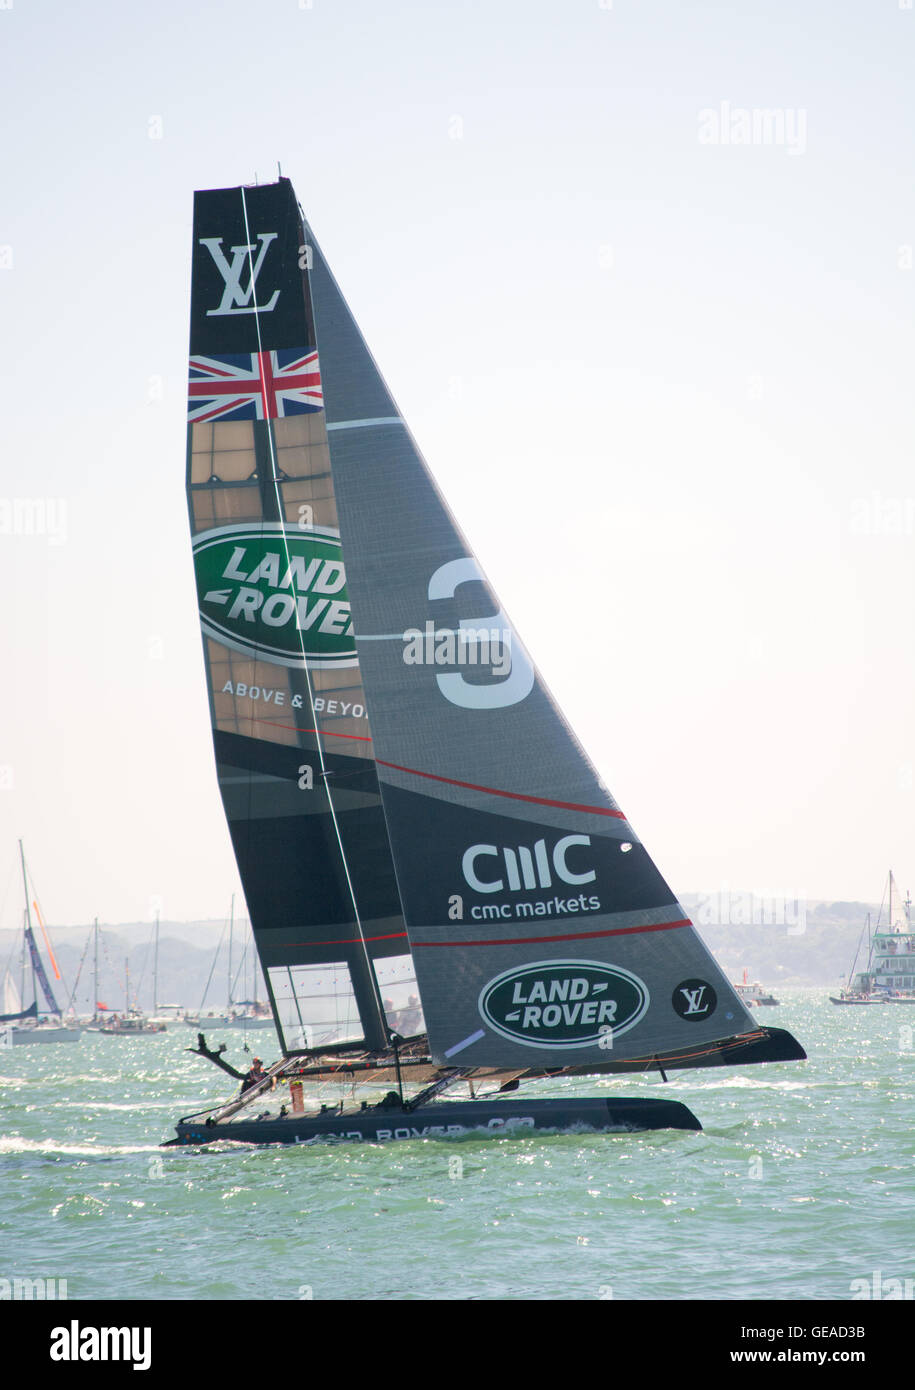 Portsmouth, UK. 23rd July, 2016.Land Rover BAR GB sailing team with Ben Ainslie competing in the America's Cup World Series event on the Solent. Stock Photo